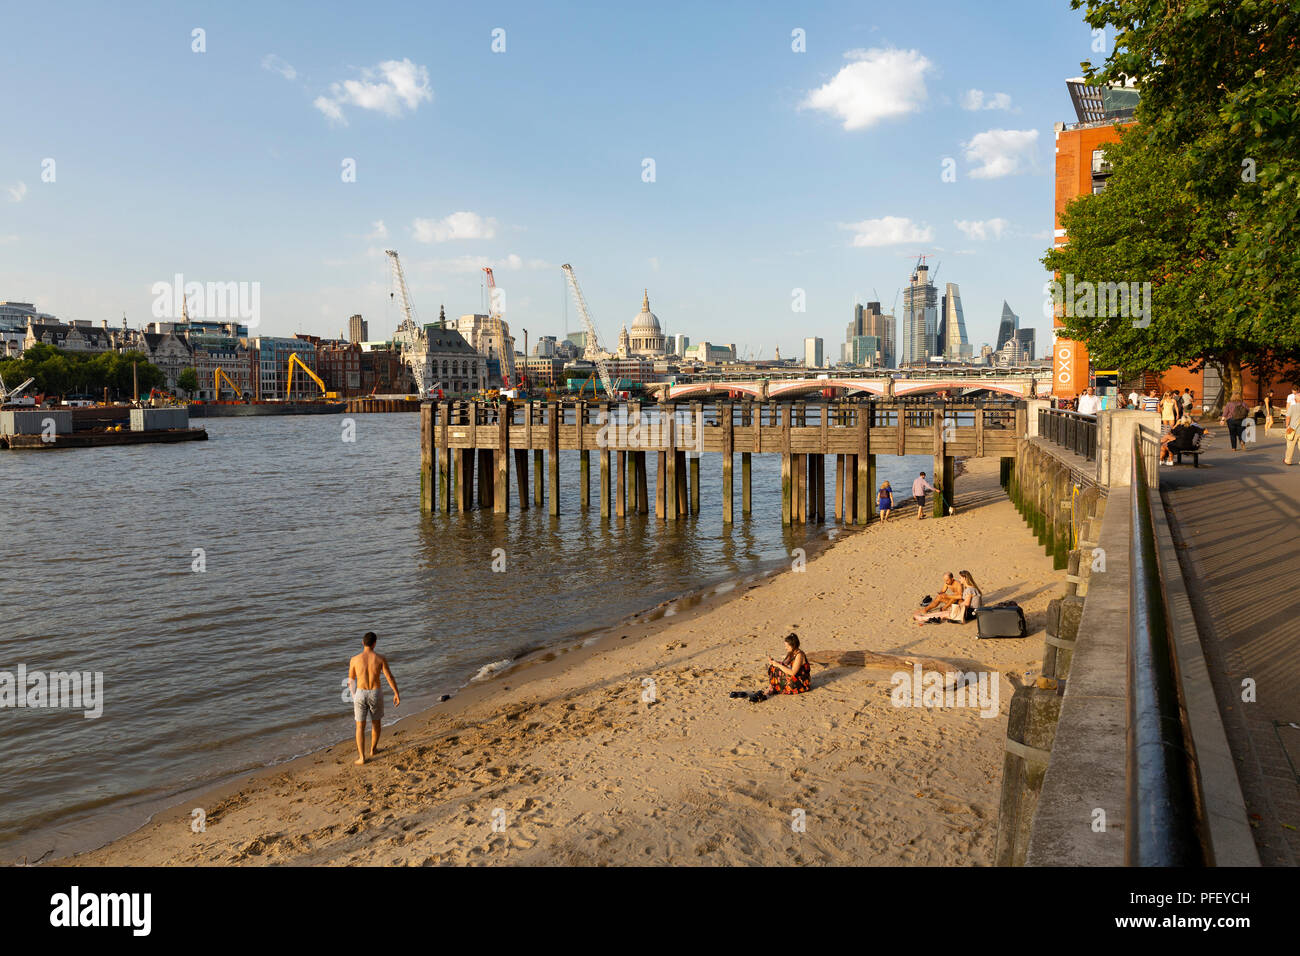 LONDON, UK - AUGUST 6, 2018 : People on the small beach at the shore of the Thames by Gabriel's Wharf on the South Bank of England's capital city with Stock Photo